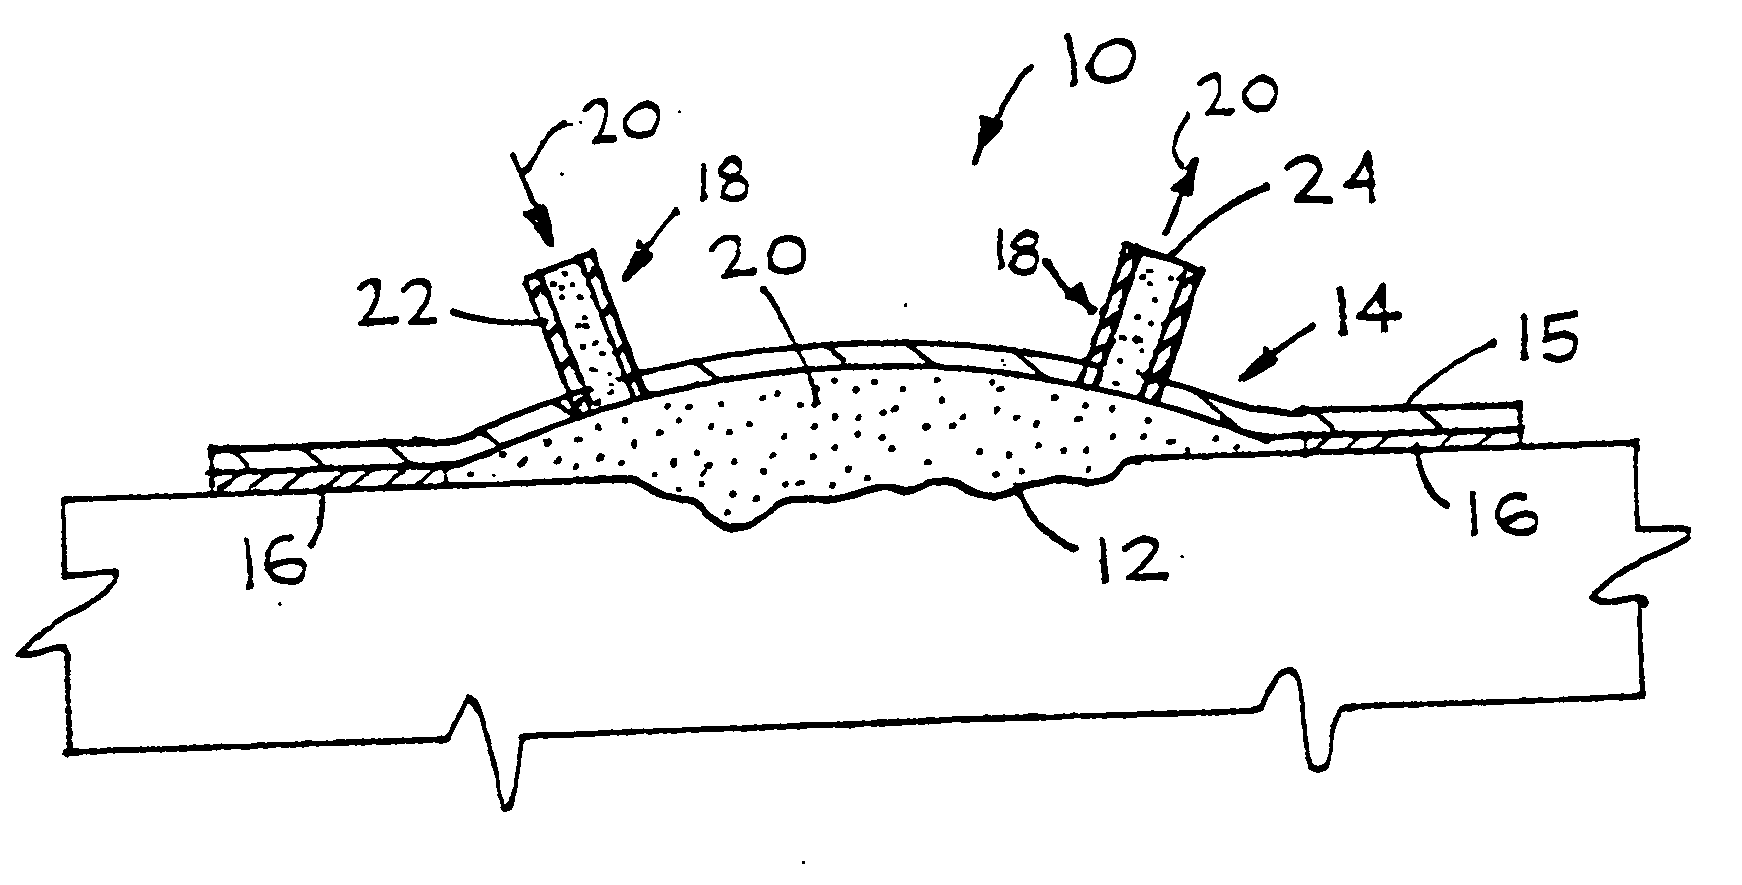 Device for treating and promoting healing of damaged body tissue